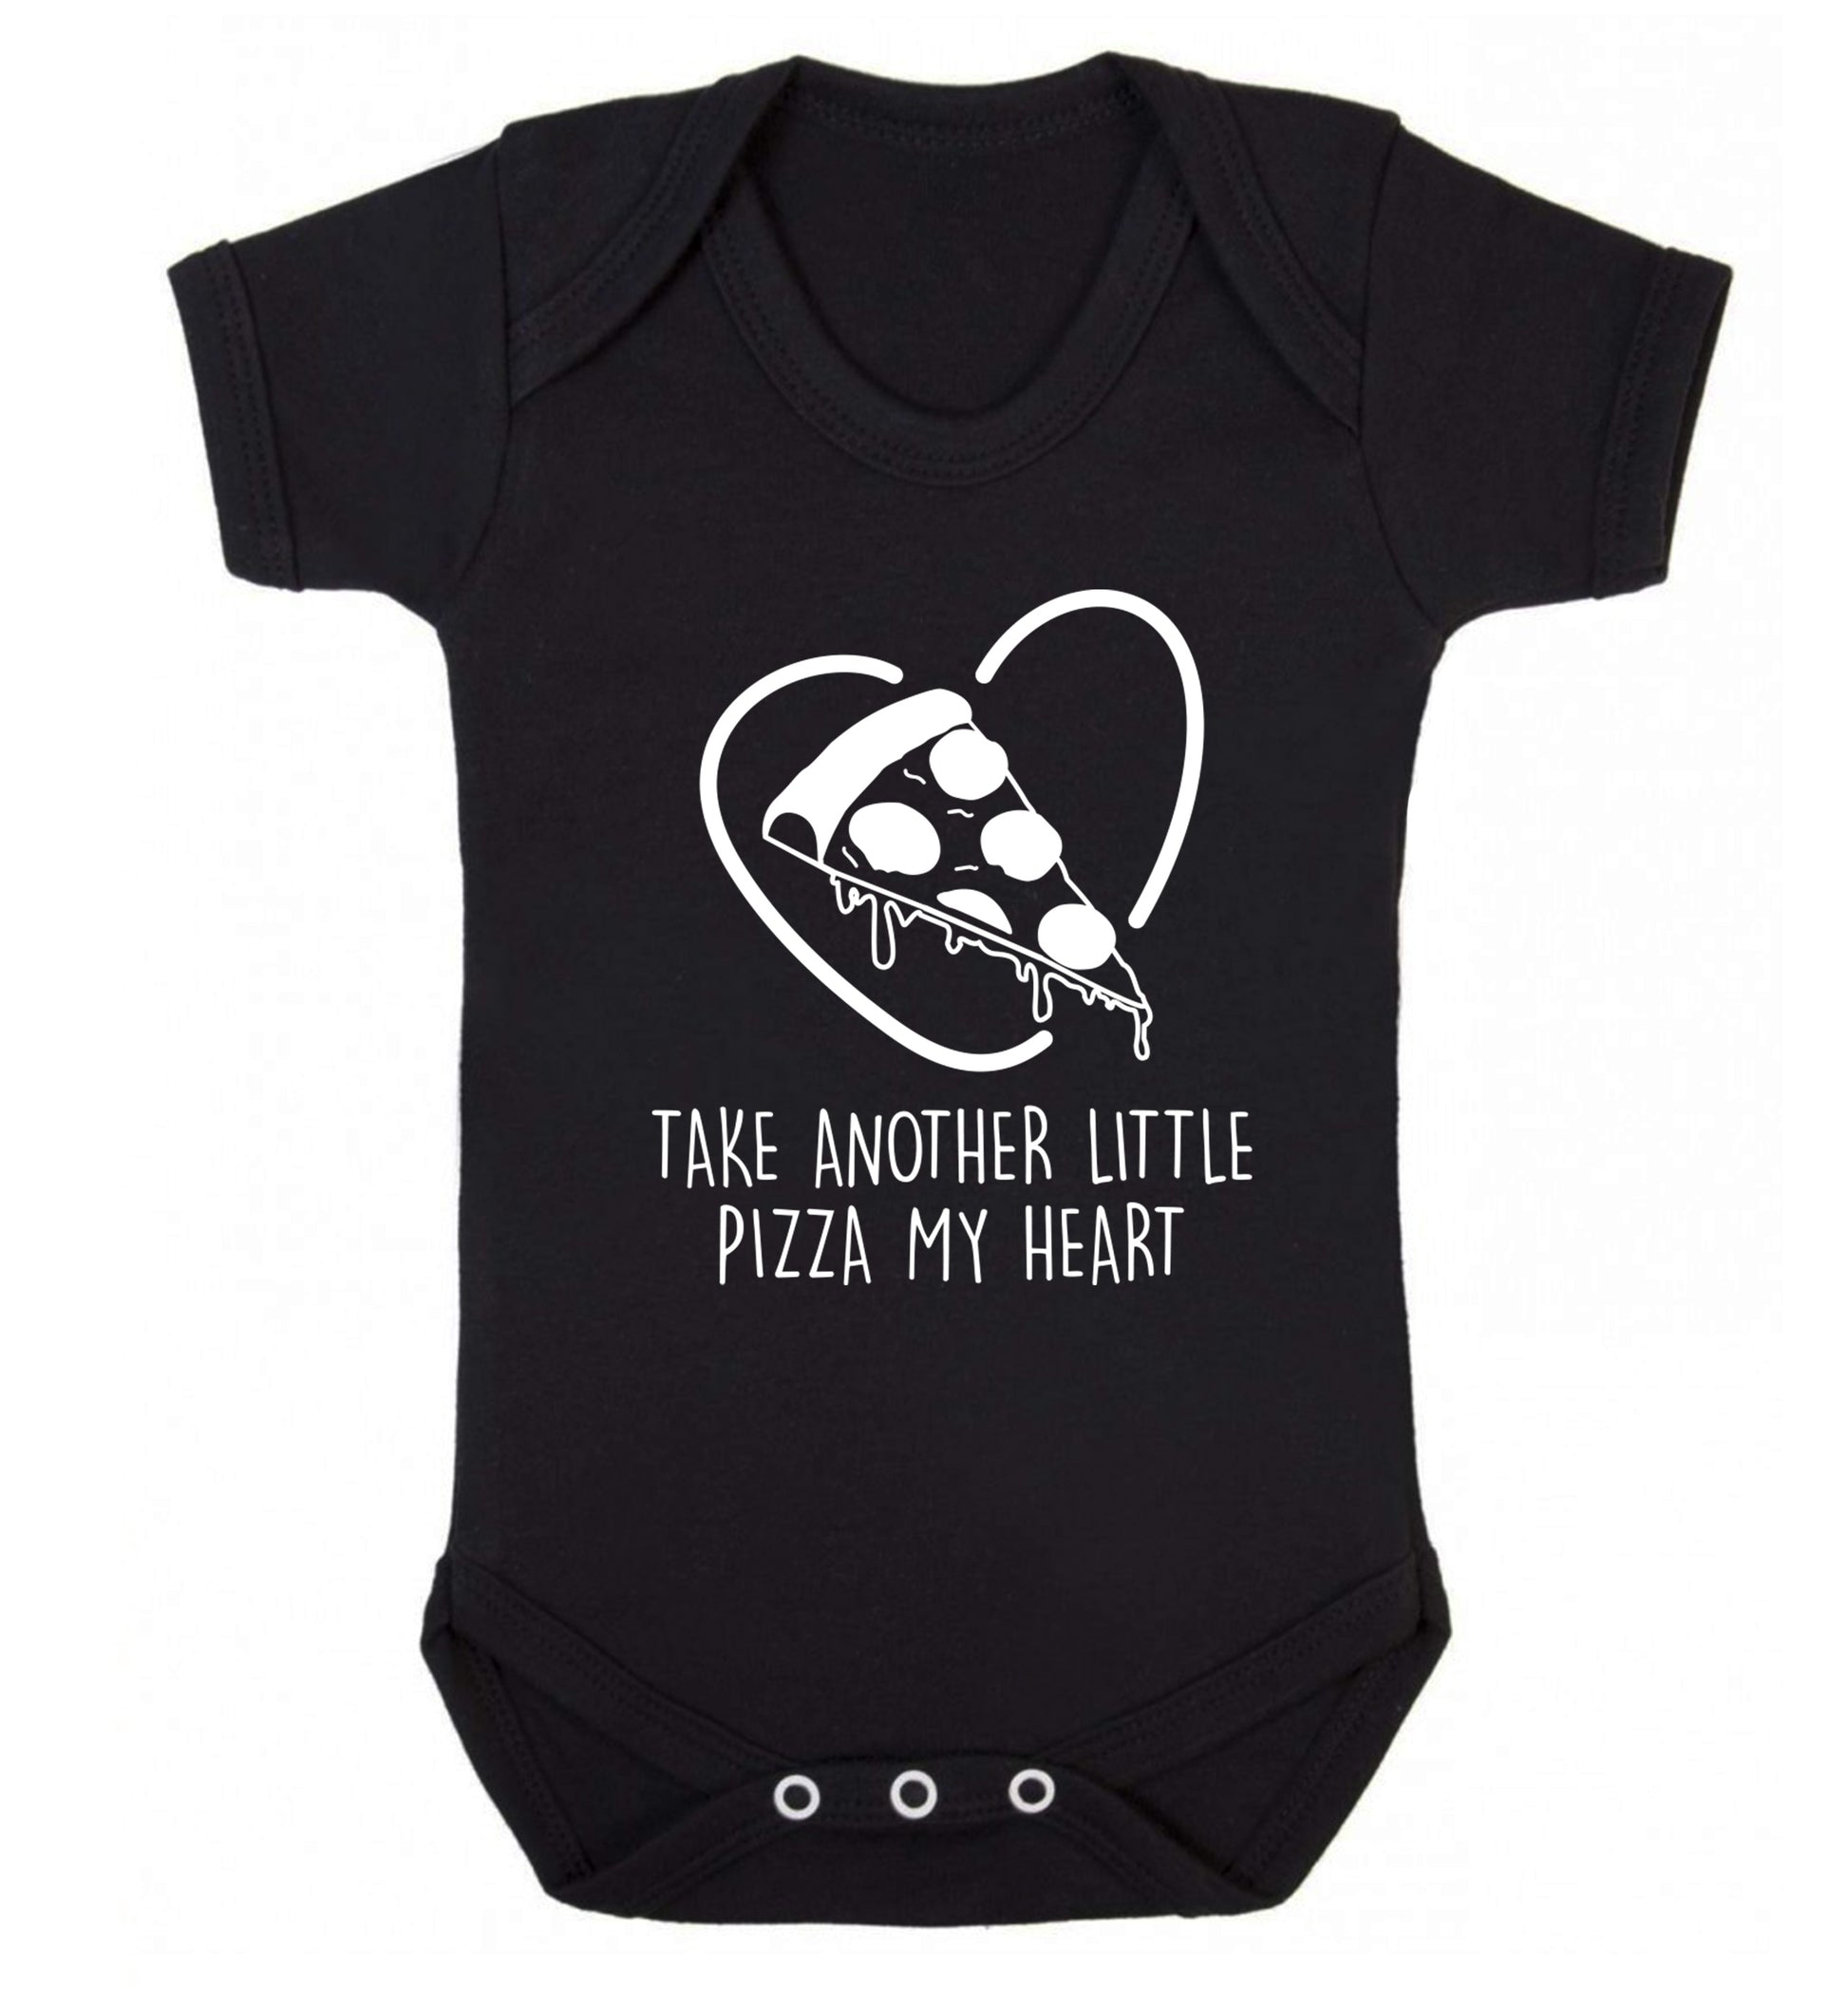 Take another little pizza my heart Baby Vest black 18-24 months